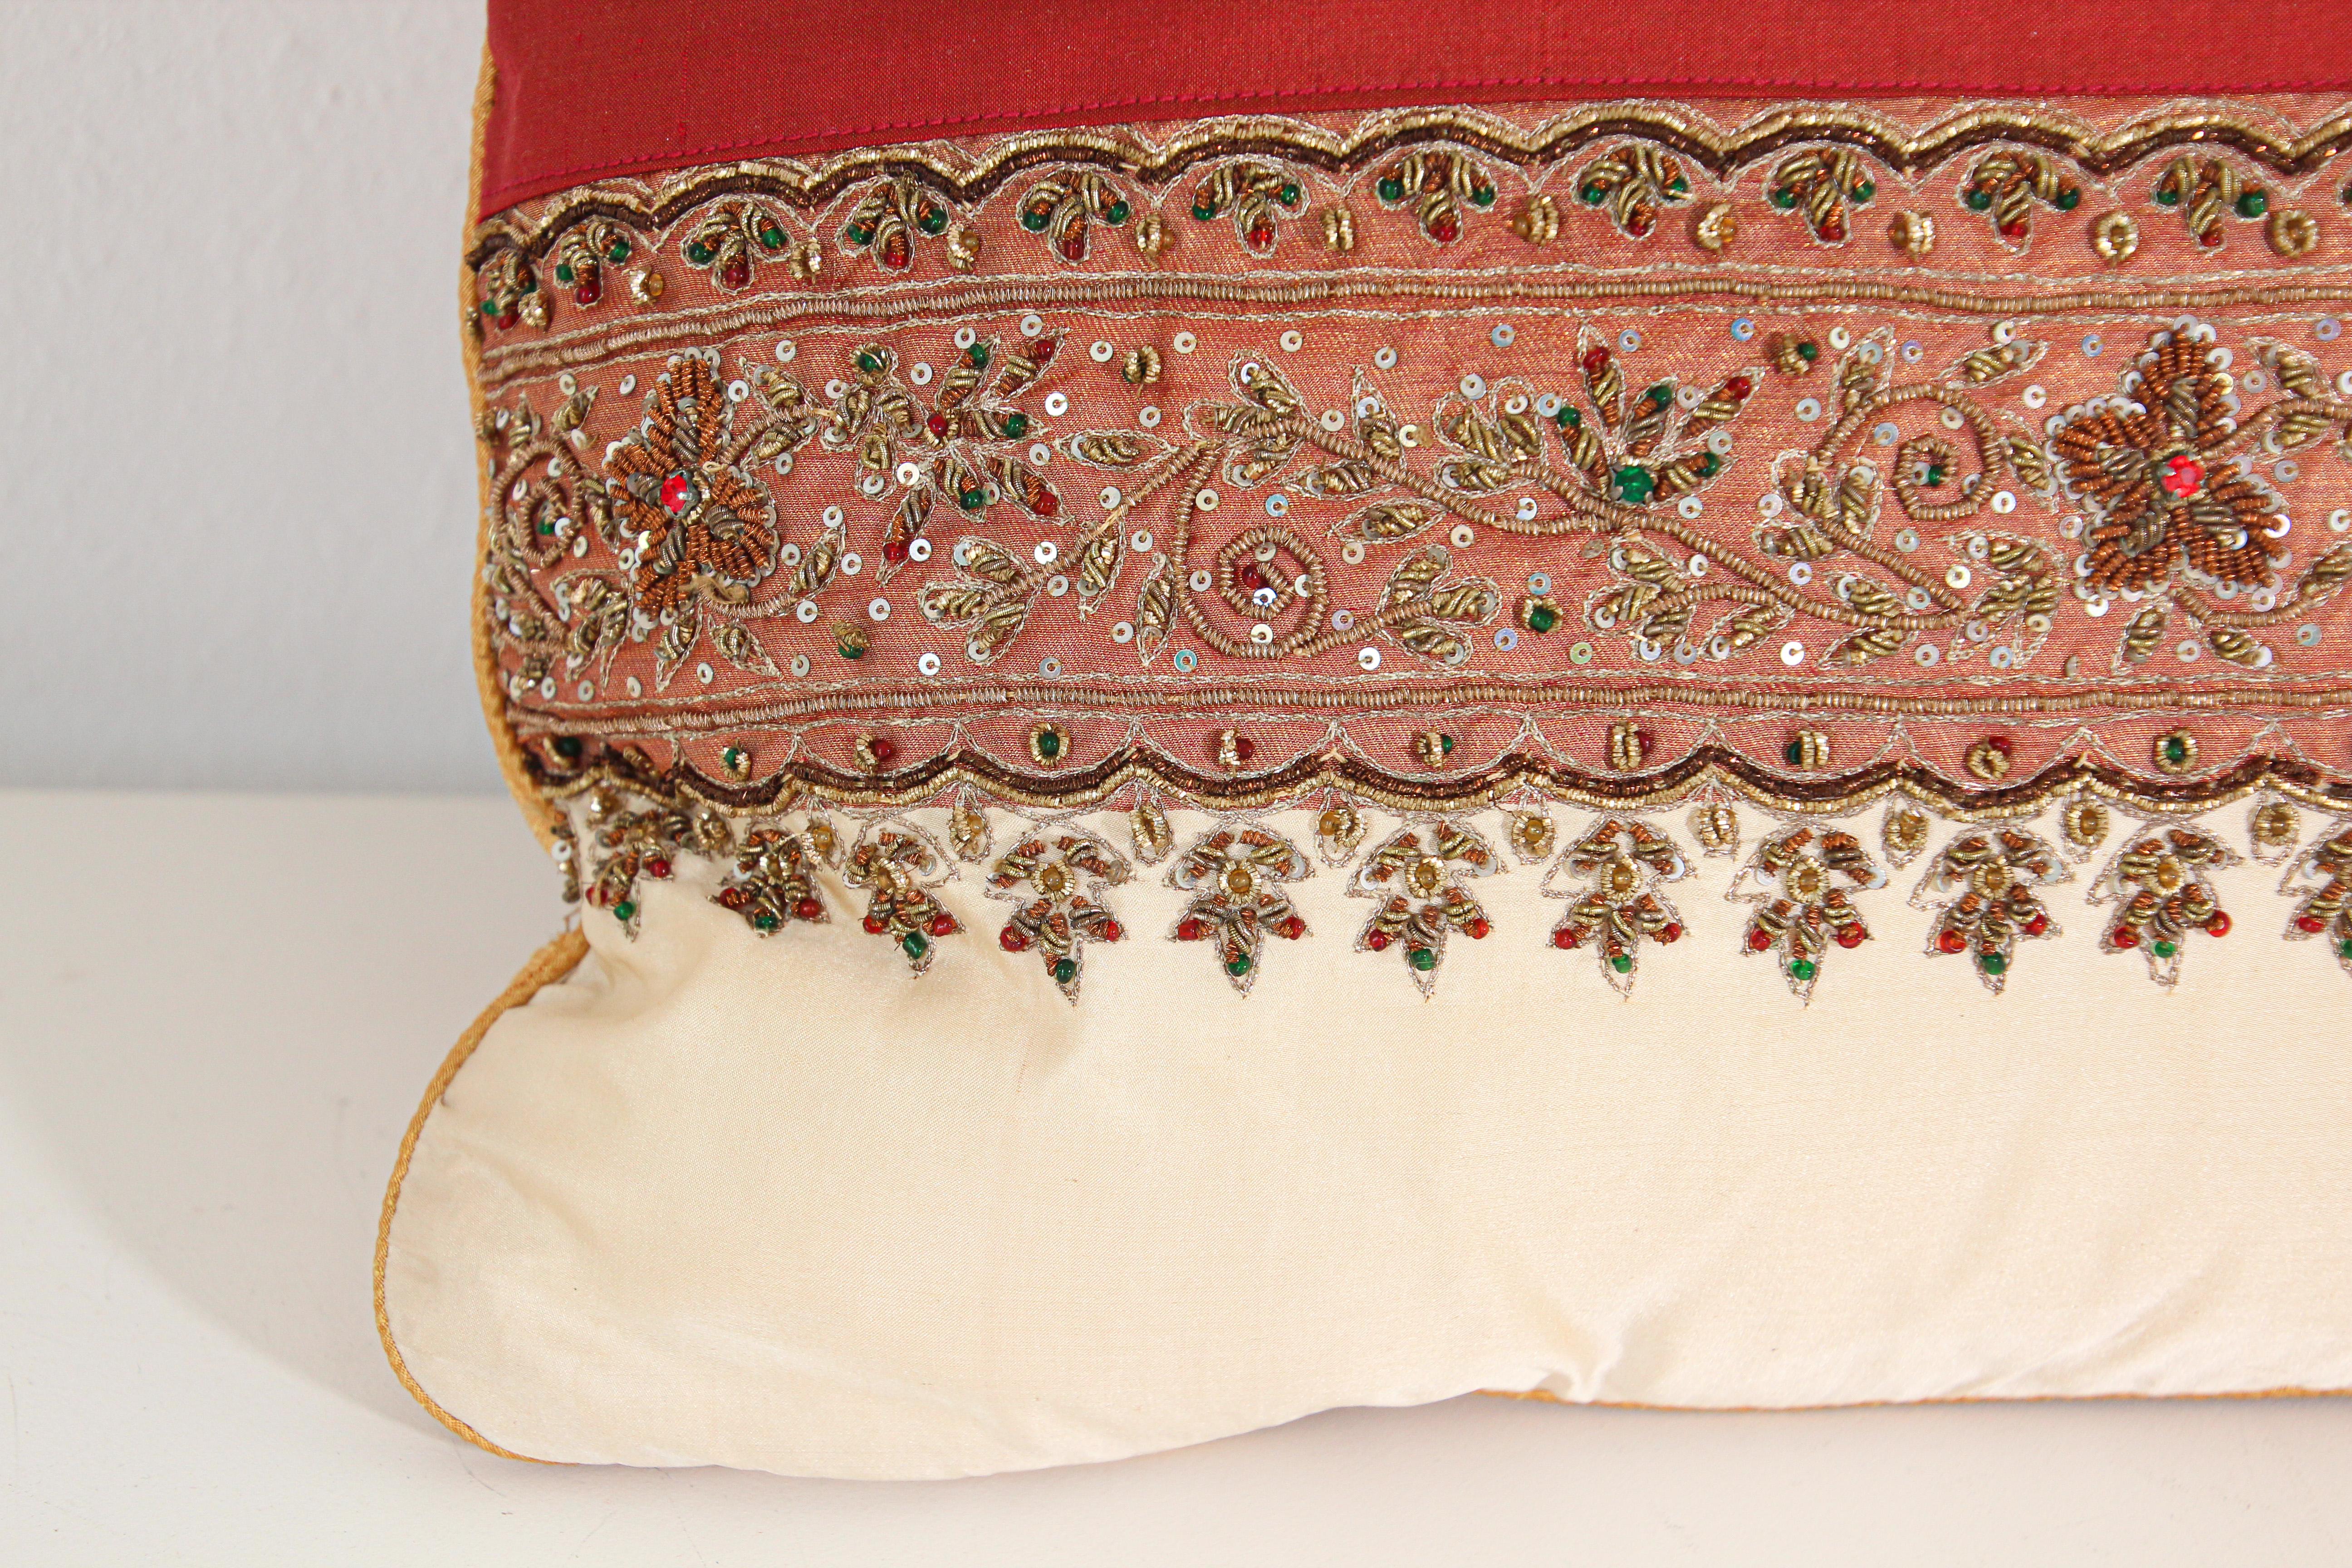 Decorative Ivory color accent lumbar pillow hand embroidered and embellished with sequins and beads.
Vanilla Dupioni silk with gold, red and green beads flower designs.
Down insert zipper in back.
Decorative twisted trims all around.
Handcrafted